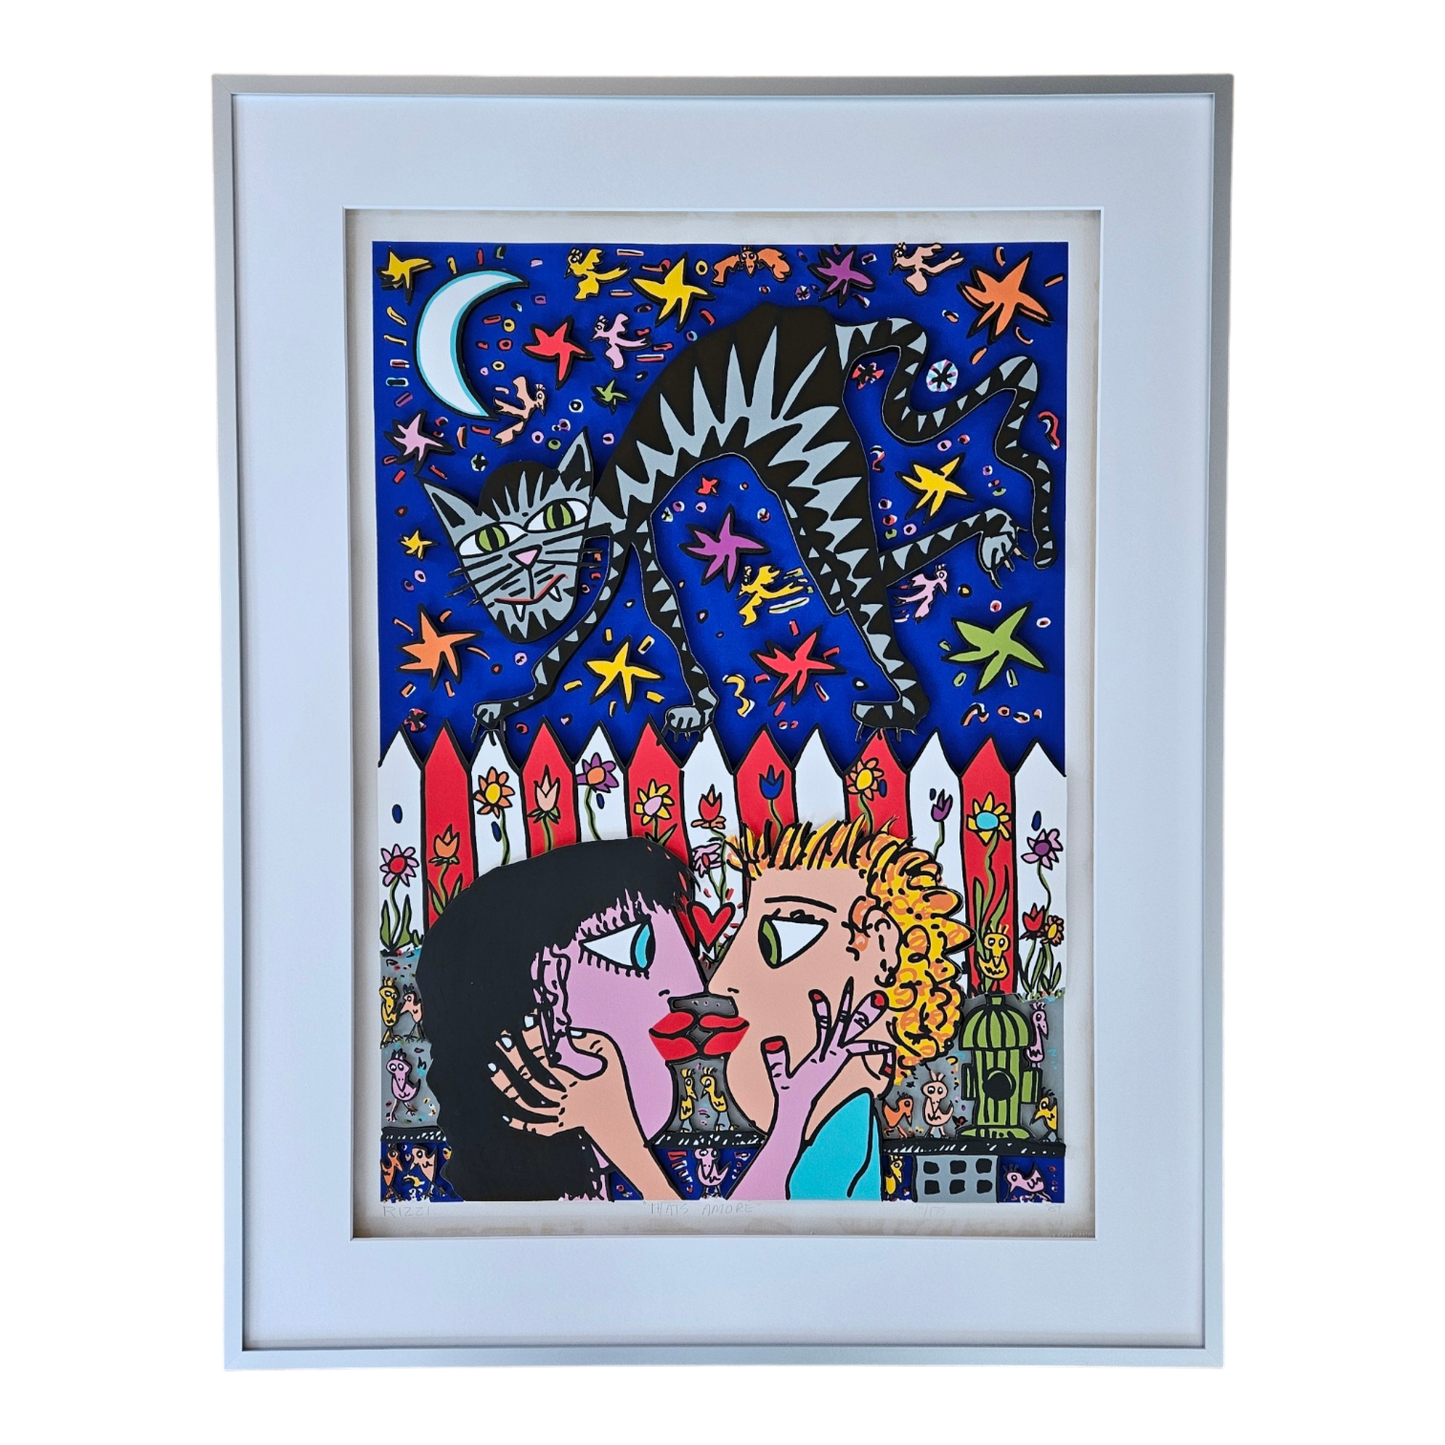 James Rizzi - That's Amore (1989)